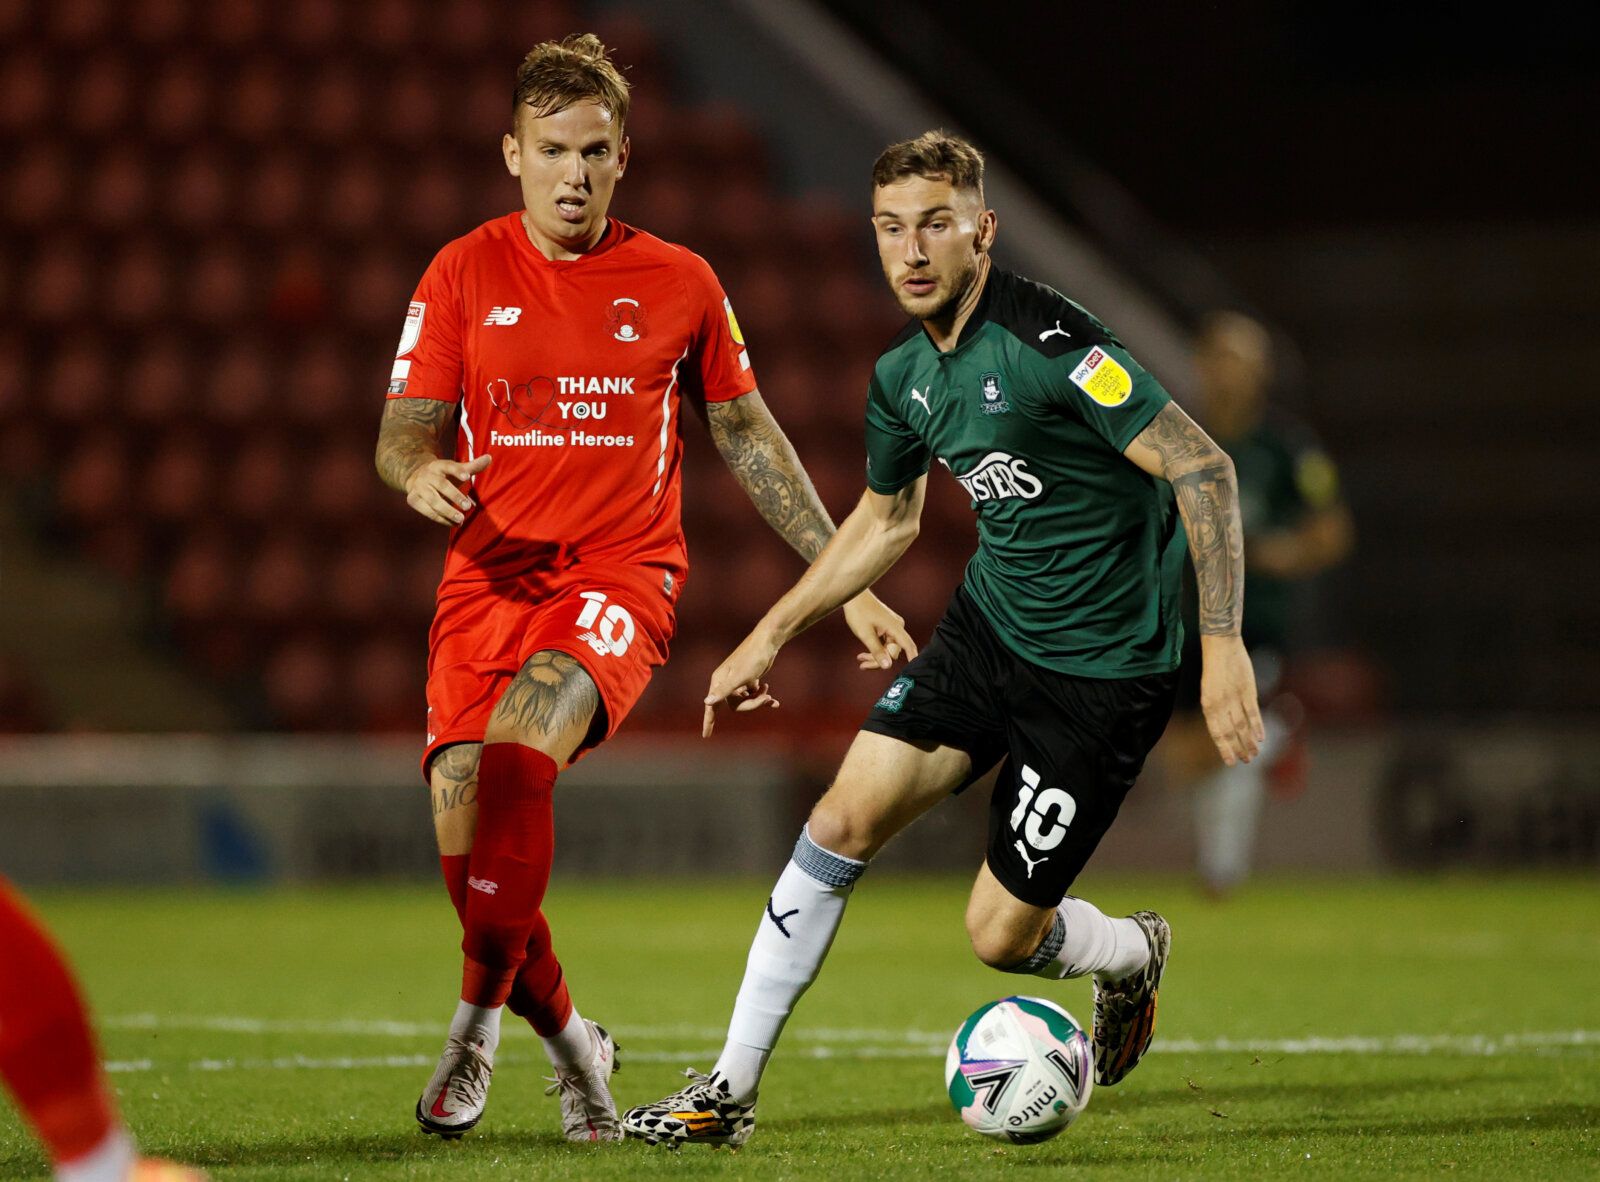 Soccer Football - Carabao Cup Second Round - Leyton Orient v Plymouth Argyle - Matchroom Stadium, London, Britain - September 15, 2020  Plymouth Argyle's Danny Mayor in action with Leyton Orient's Jordan Maguire-Drew  Action Images/John Sibley  EDITORIAL USE ONLY. No use with unauthorized audio, video, data, fixture lists, club/league logos or 